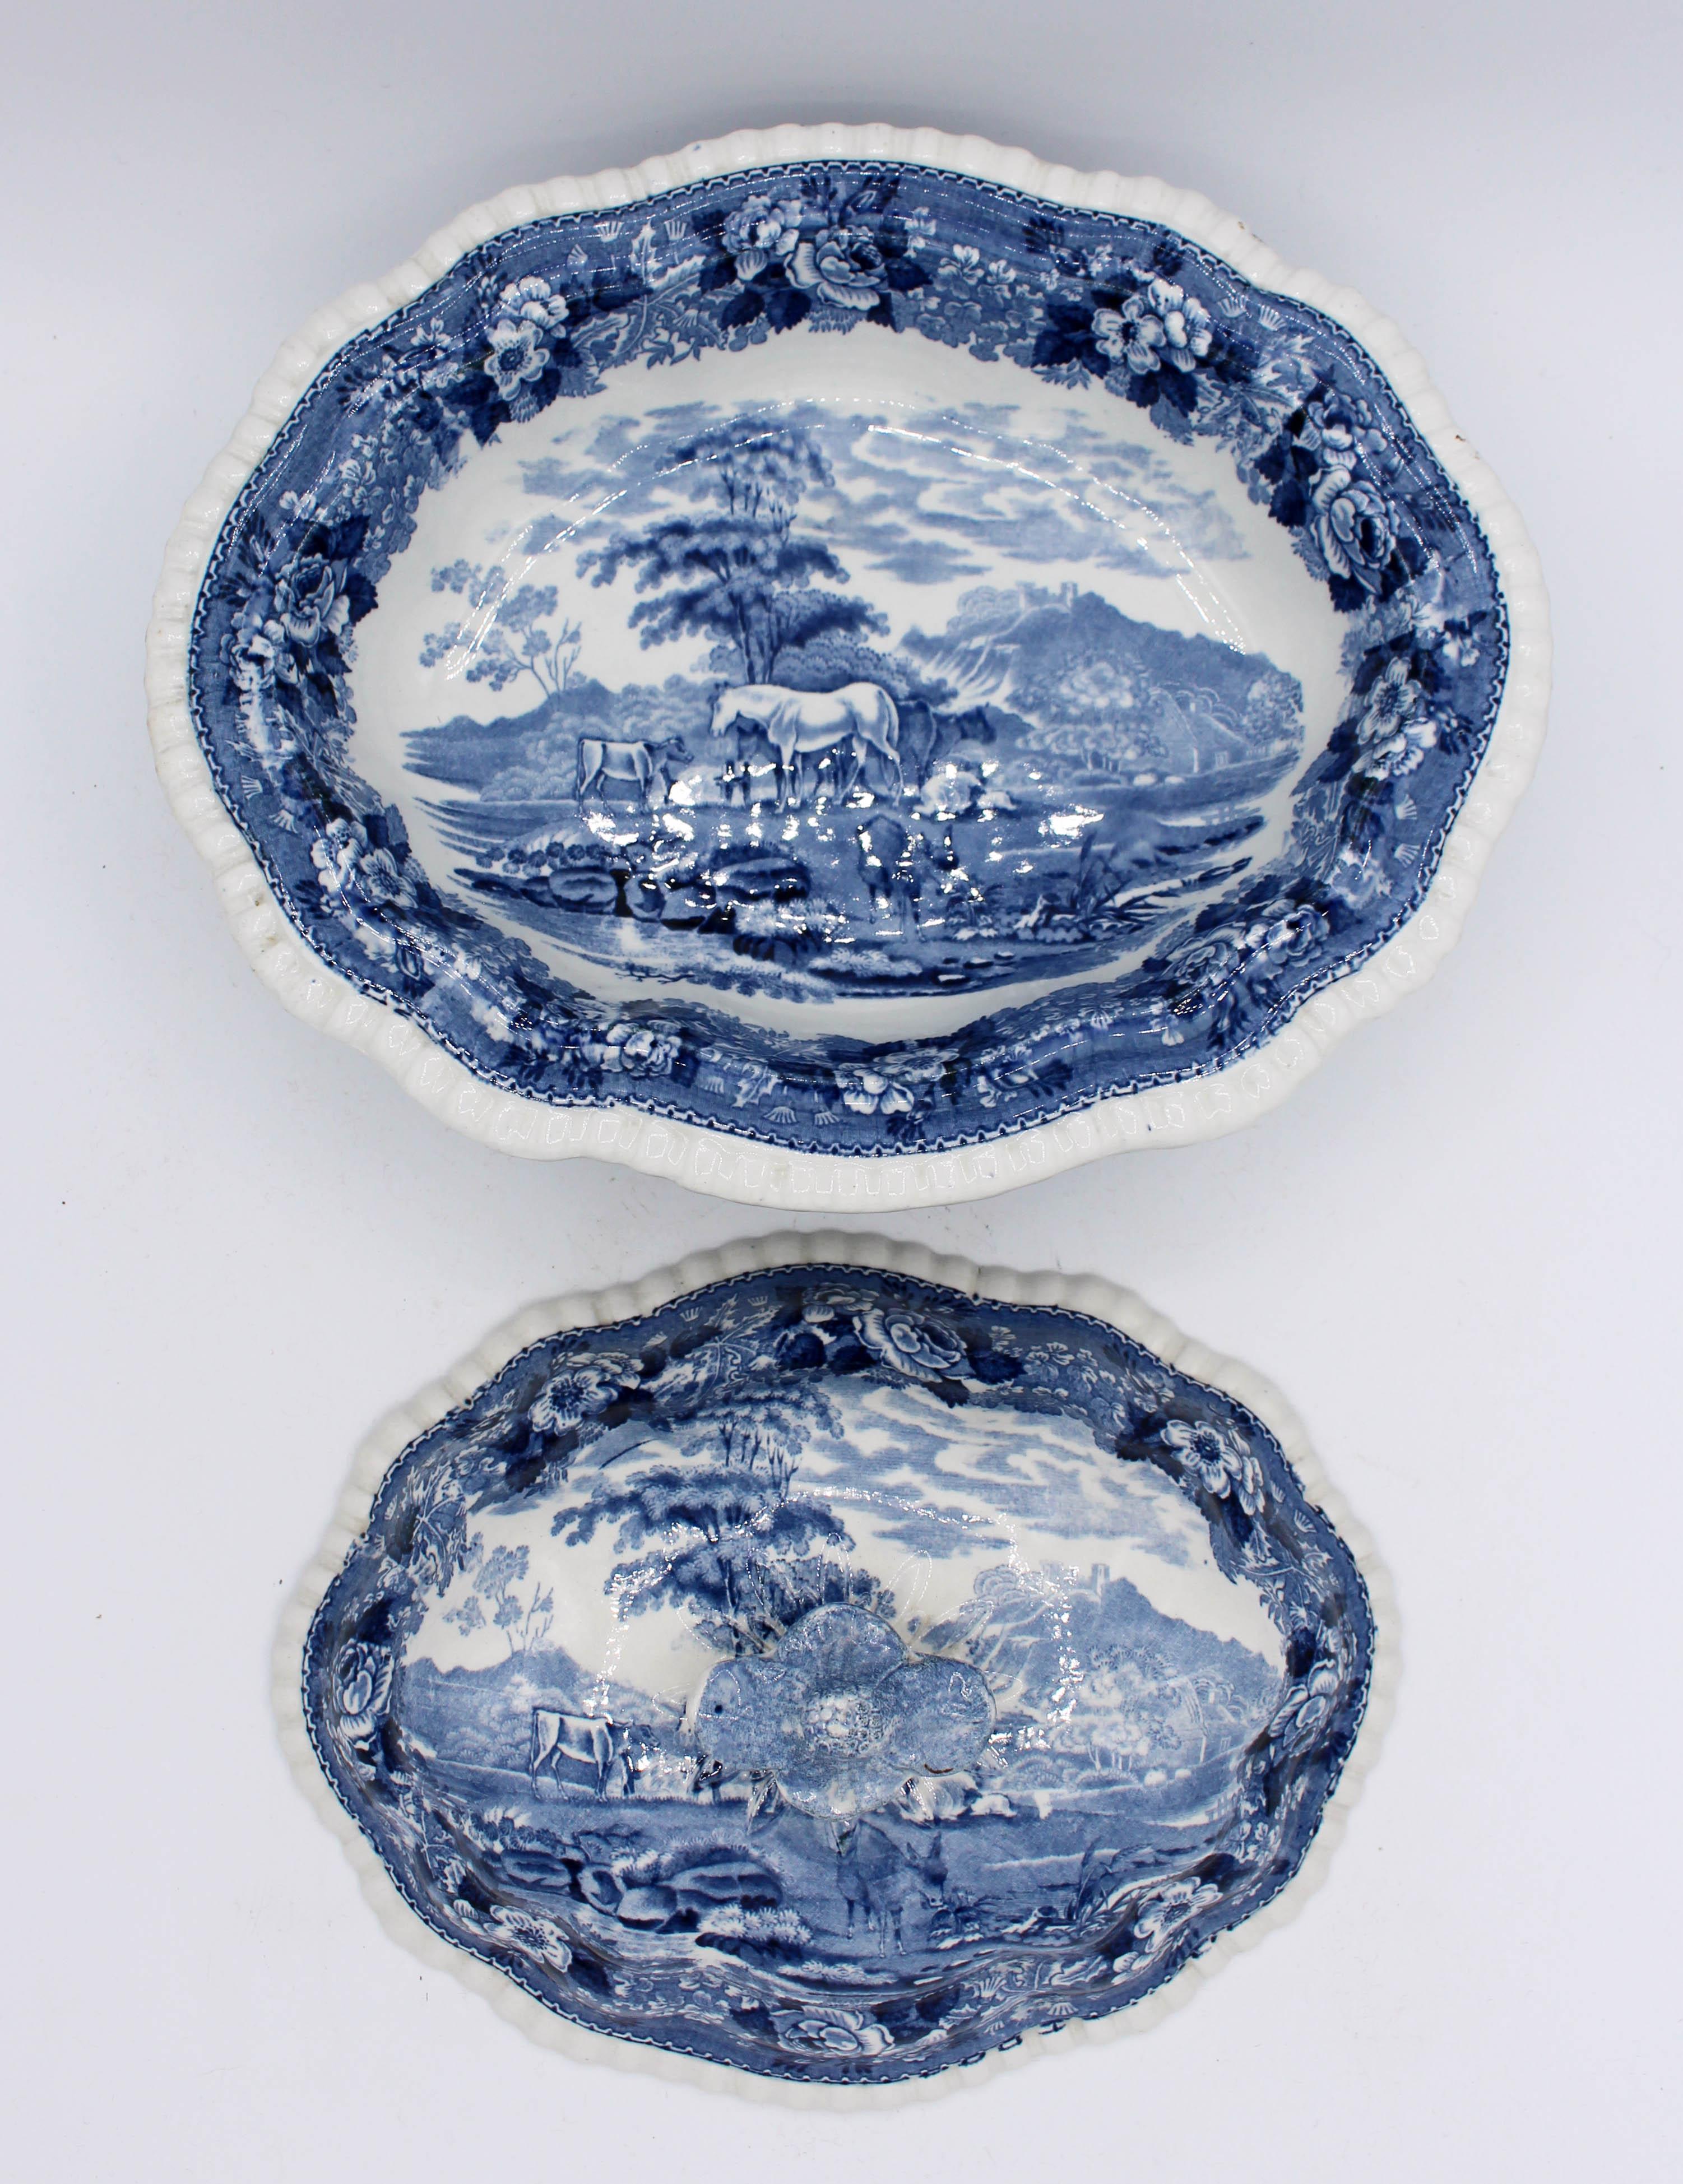 An ironstone covered vegetable dish, c. 1880, William Adams. Blue and white in the charming 